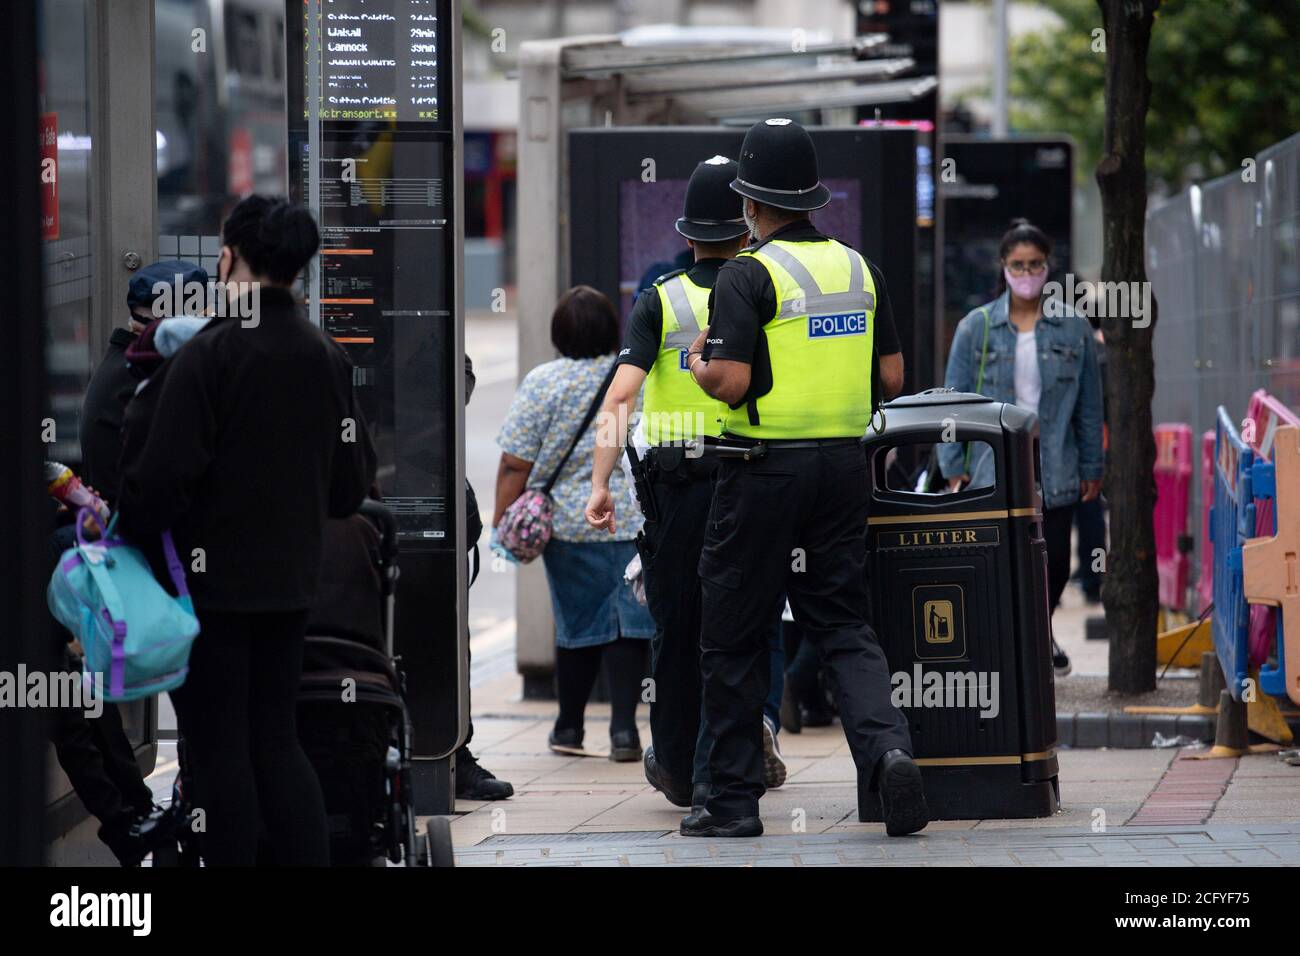 Police on patrol in Birmingham city centre days after a lone knifeman carried out a stabbing spree which saw one dead and several injured. Stock Photo